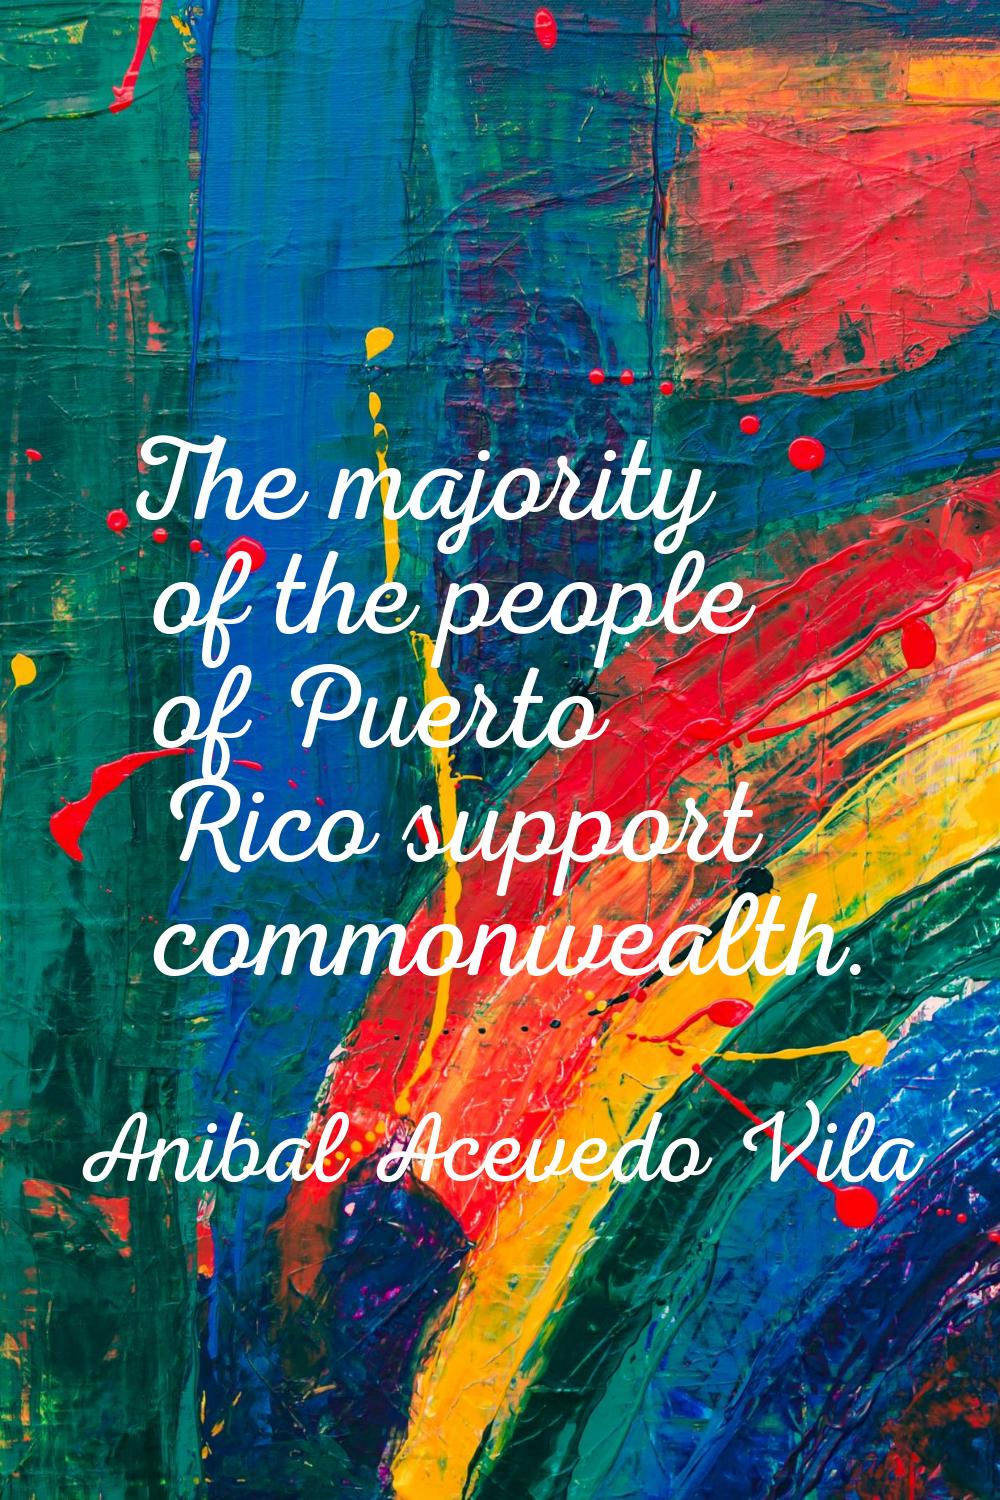 The majority of the people of Puerto Rico support commonwealth.